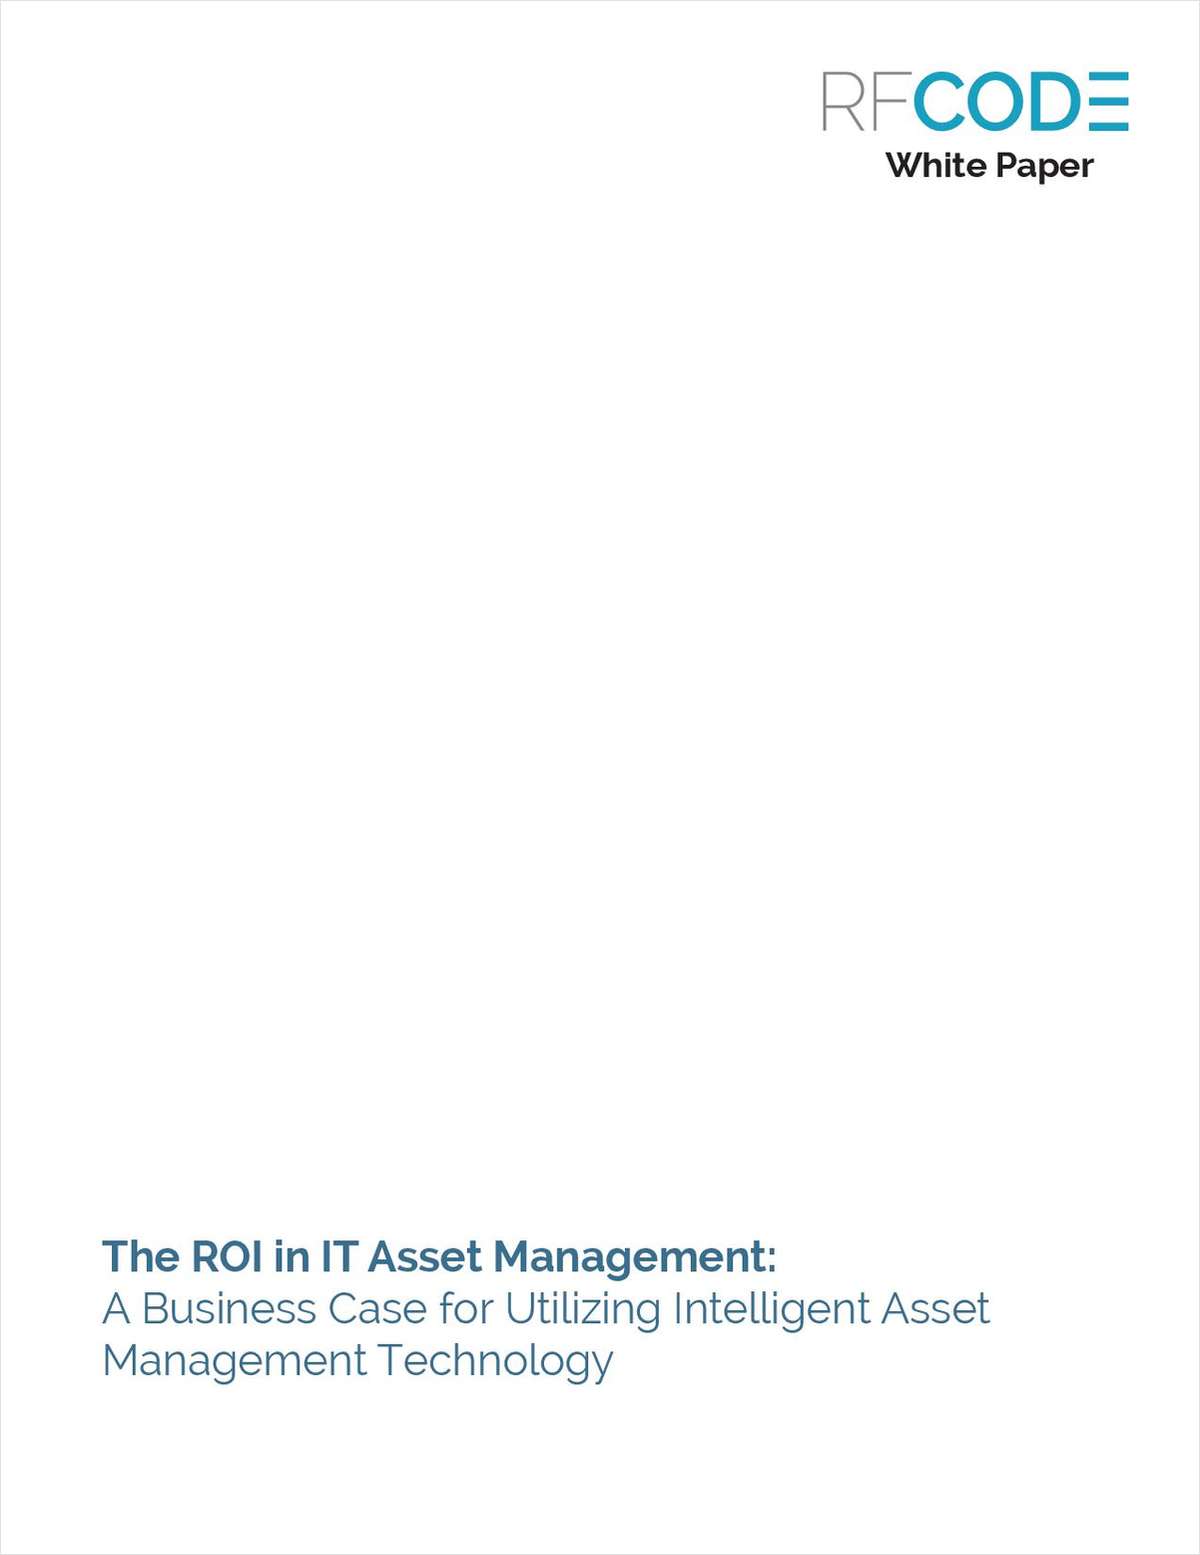 The ROI in IT Asset Management